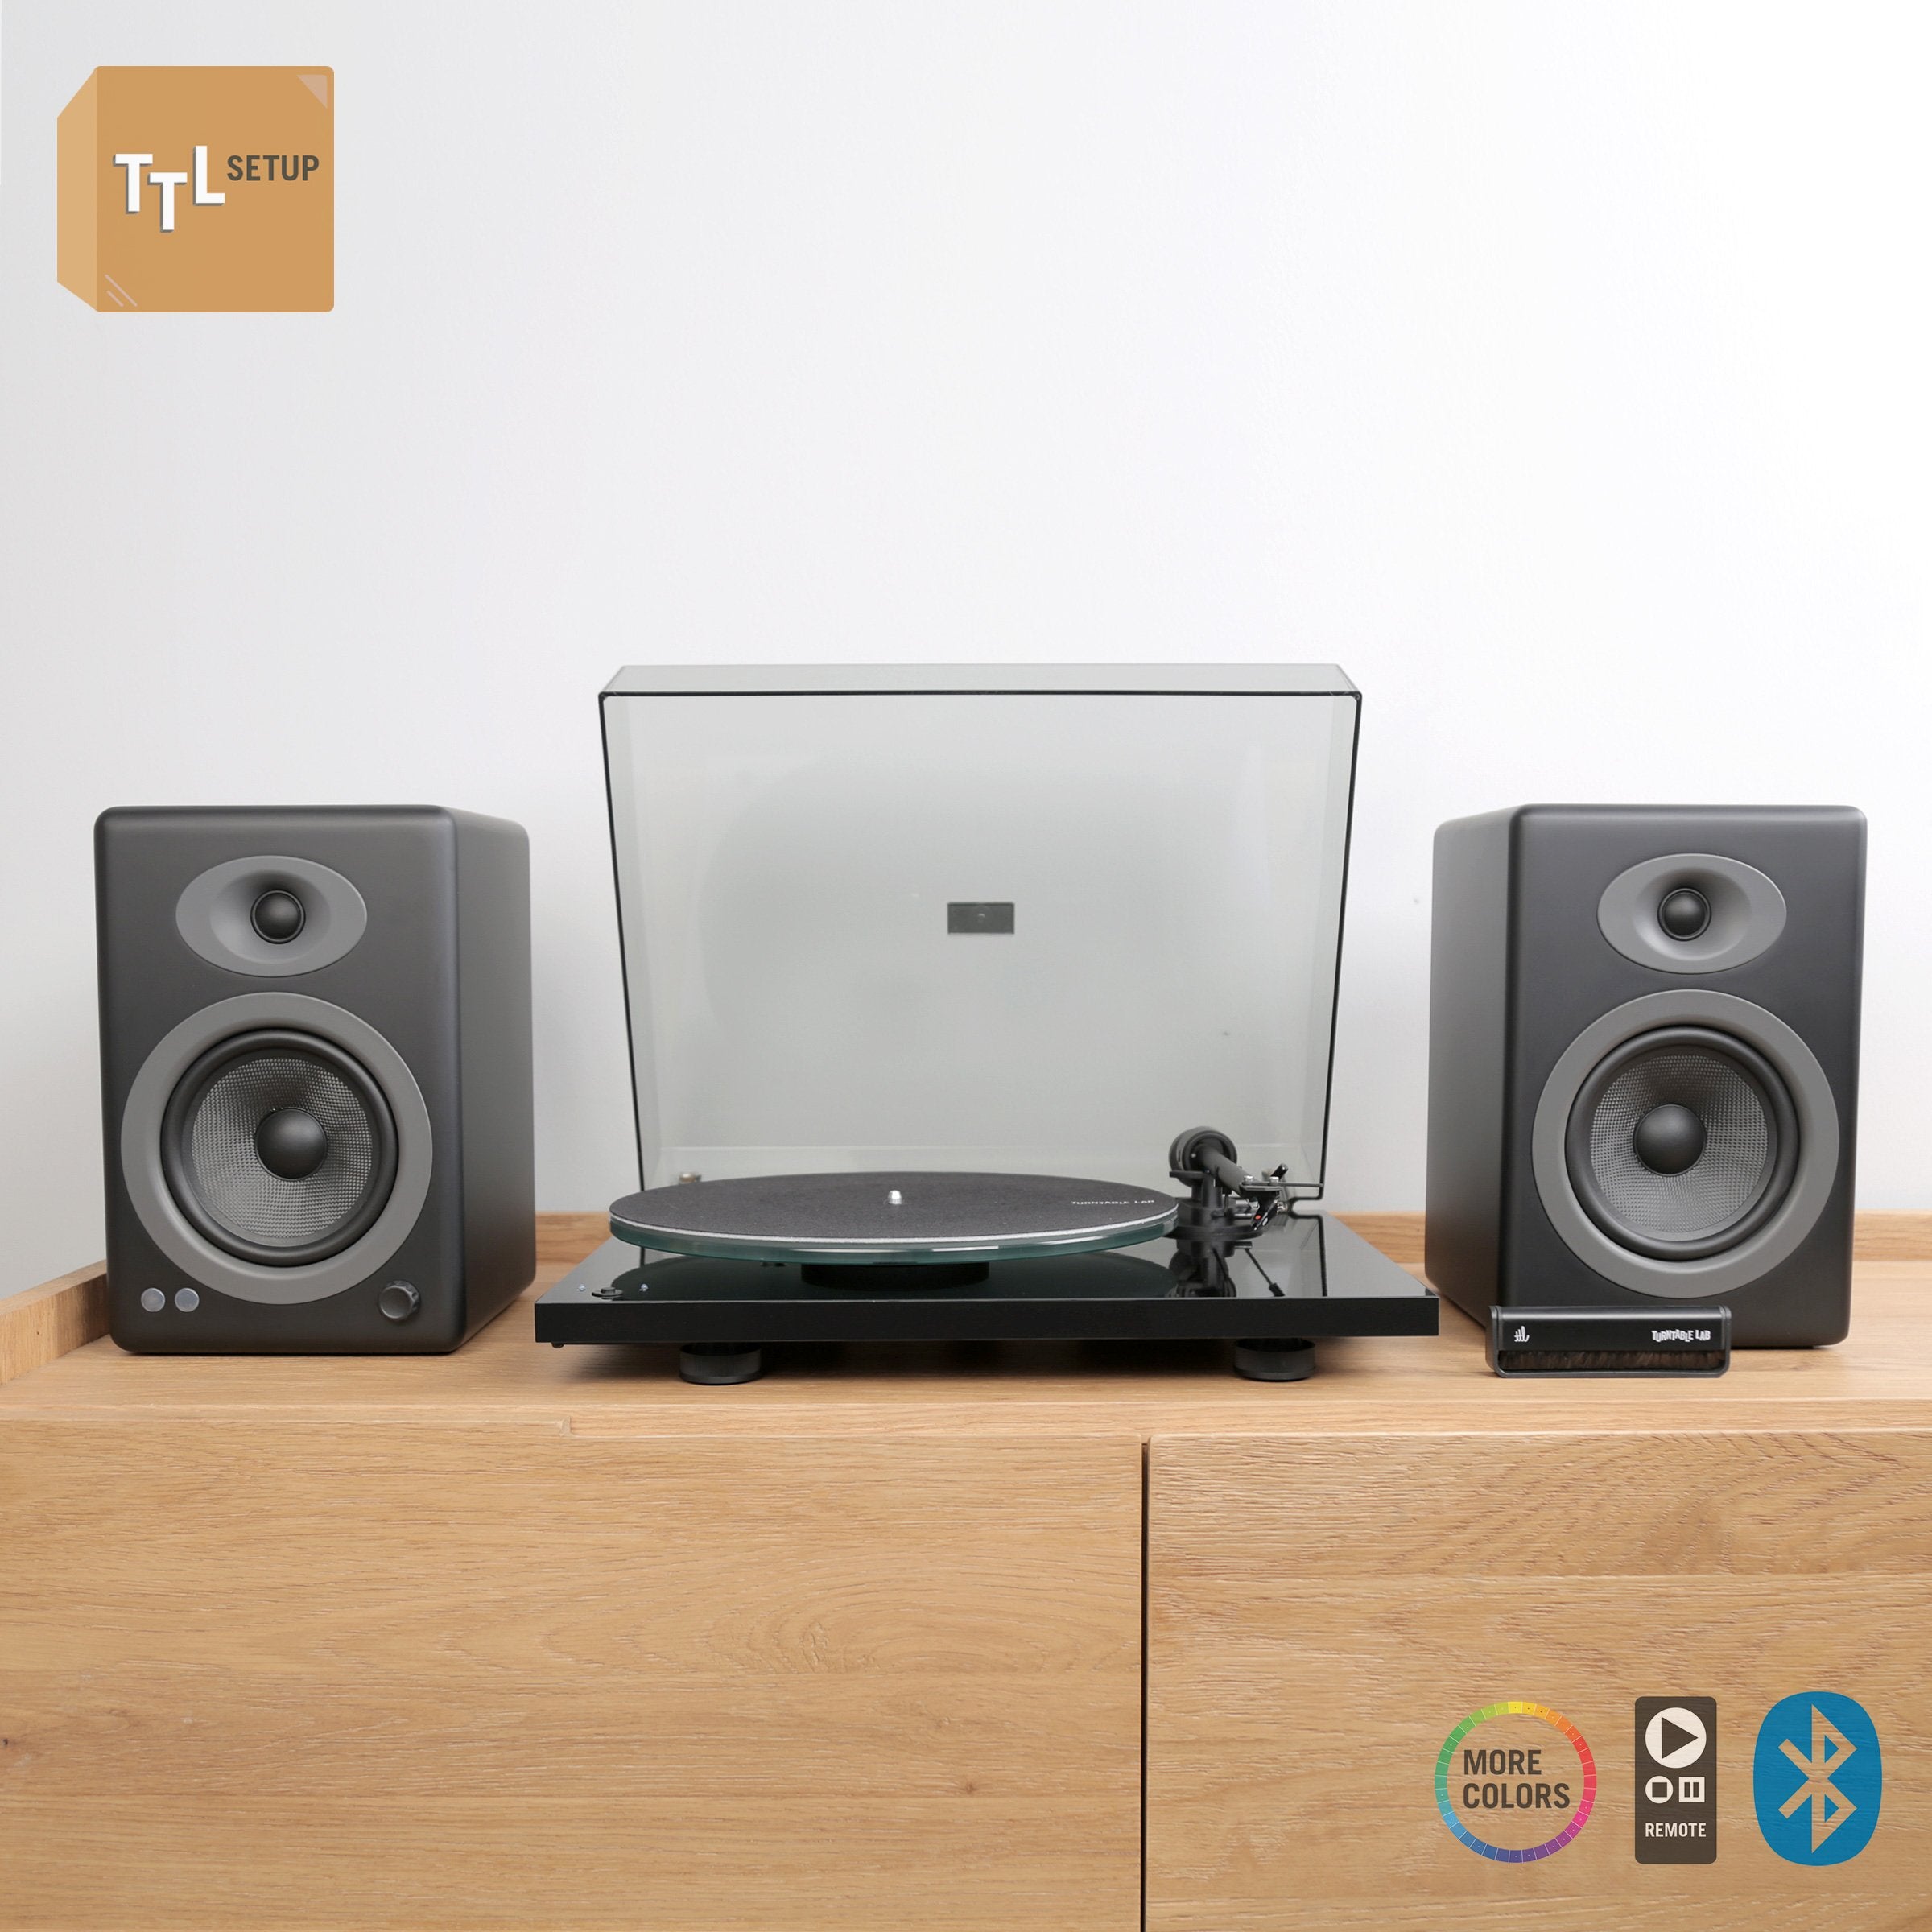 Pro-Ject: T1 Phono SB / Audioengine A5+W / Turntable Package